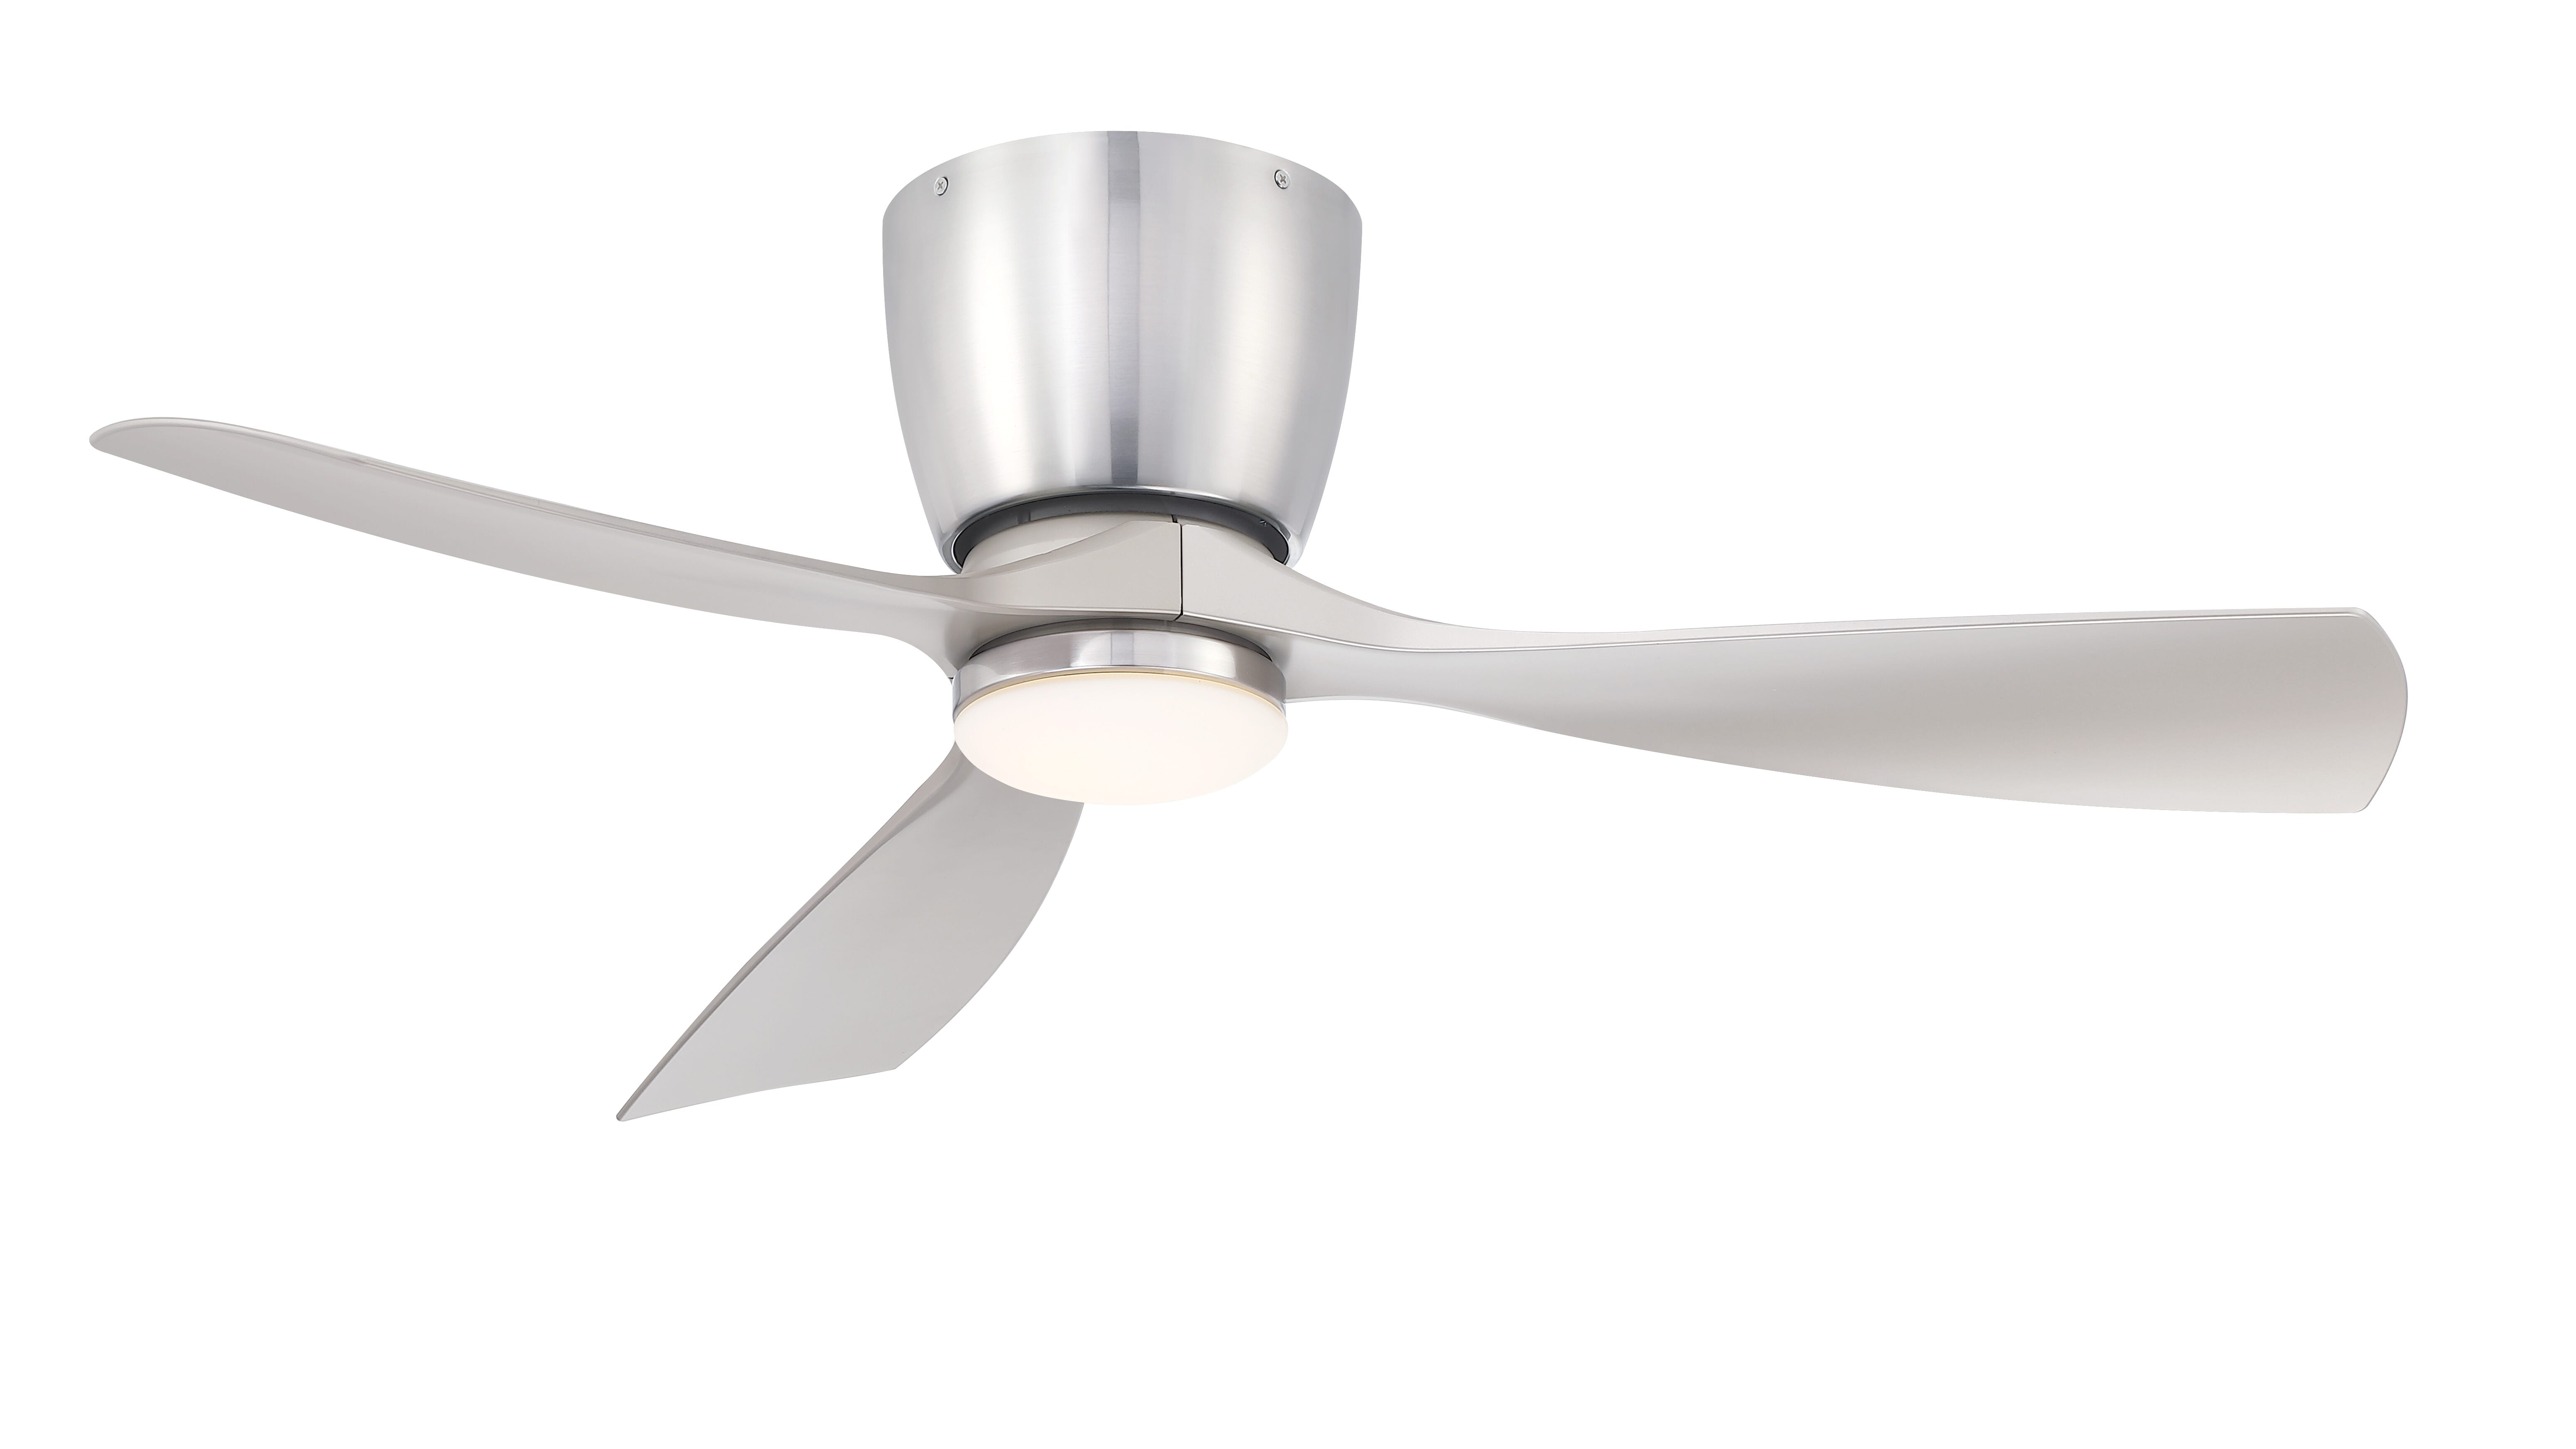 Fanimation Klinch 44"" LED Indoor Ceiling Fan in Brushed Nickel with Opal Frosted Glass -  FPS7681BN